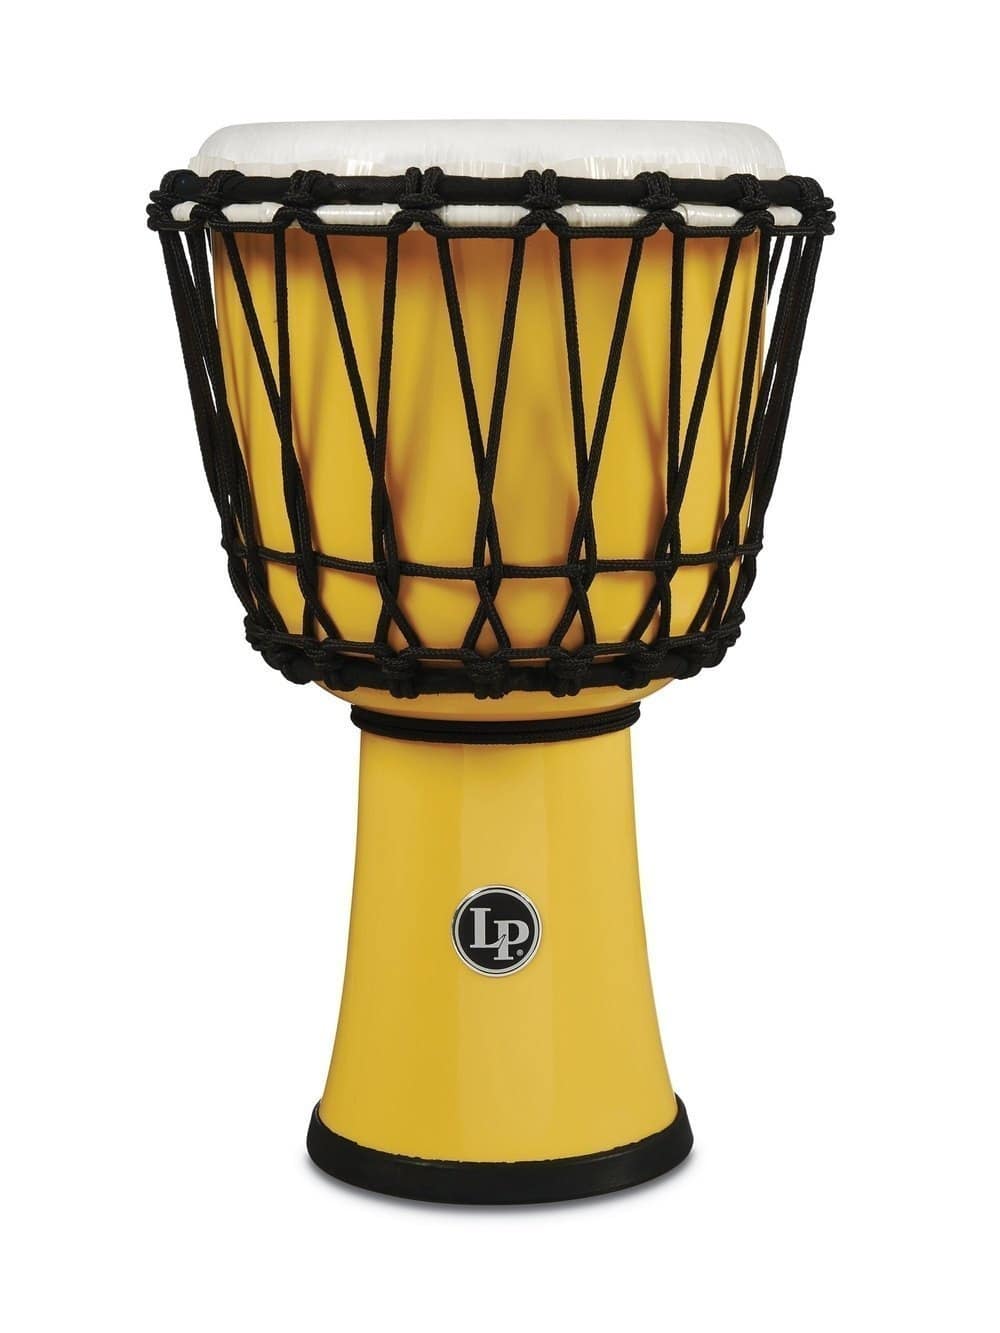 LP LATIN PERCUSSION LP1607YL DJEMBE WORLD 7-INCH RUPE TUNED CIRCLE GEEL